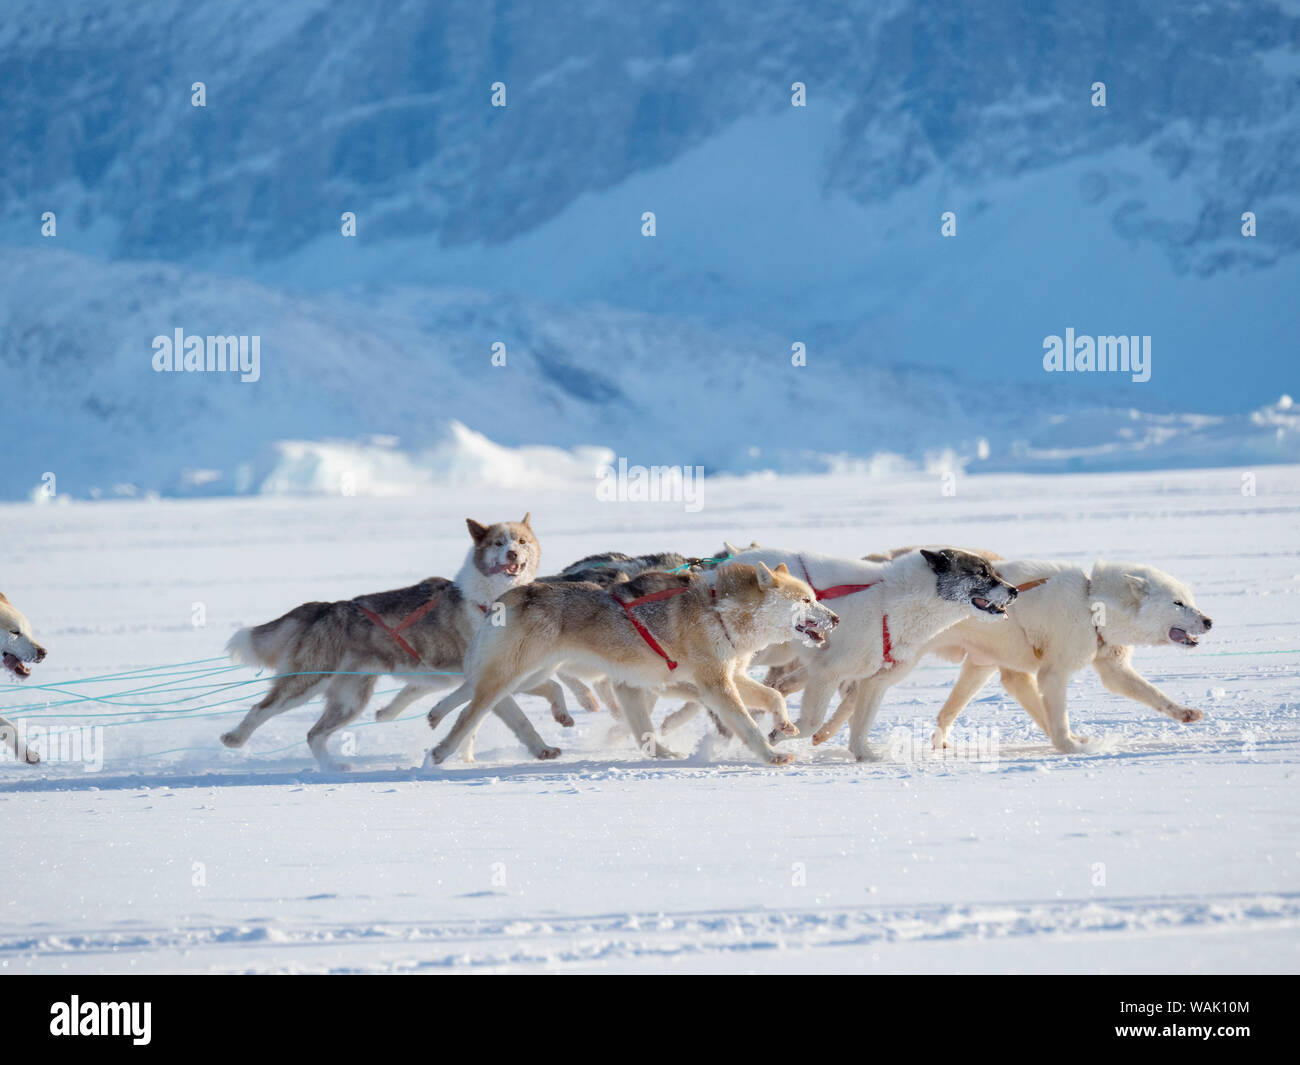 Sled dog race finish on frozen fjord, Saatut near Uummannaq. Qualifier for the Greenland Championships 2018. (Editorial Use Only) Stock Photo